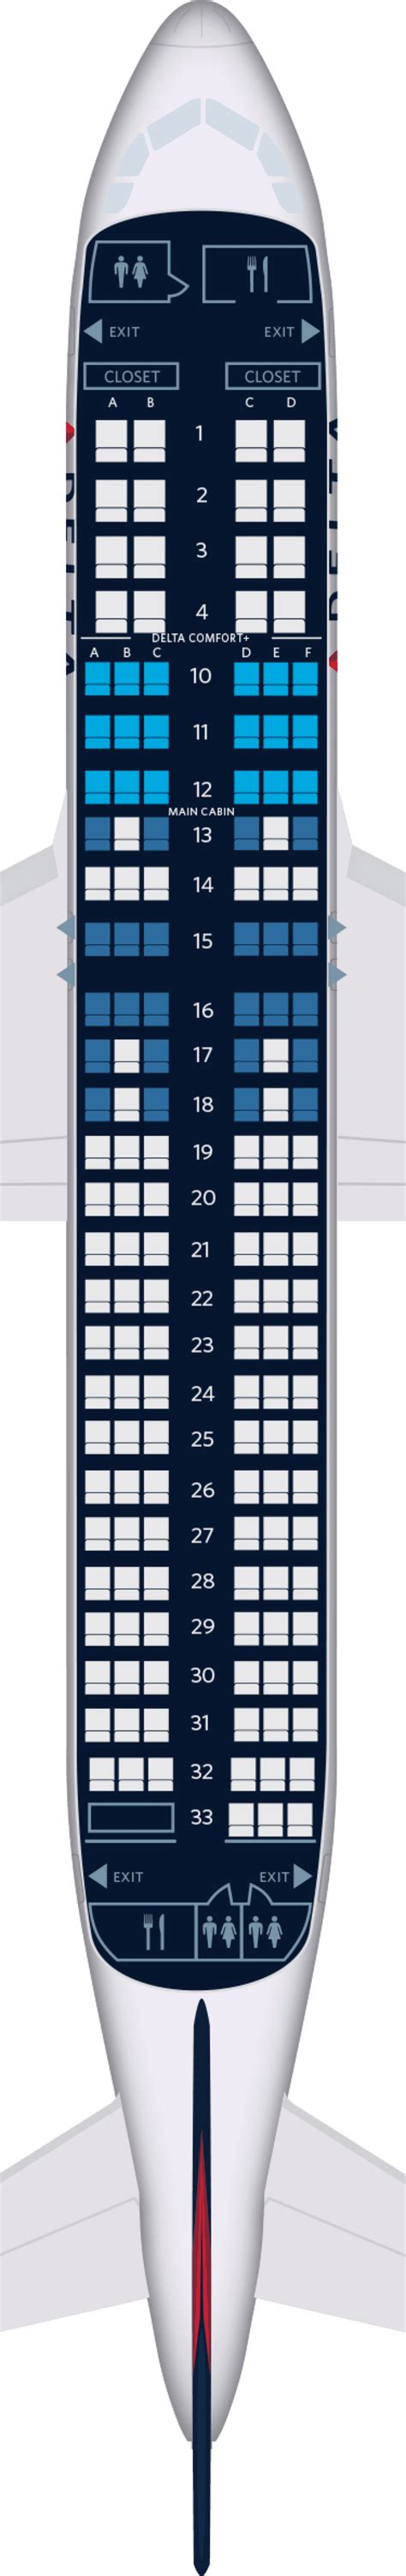 Relatively-speaking, it is an okay seat given the size and type of aircraft (Airbus A320) and on par with that proffered by other airlines utilizing aircraft of similar size domestically. Of course, it is not the same as the lie-flat seat found in business and first class on several of the larger aircraft used domestically by United (e.g. B-757 .... 